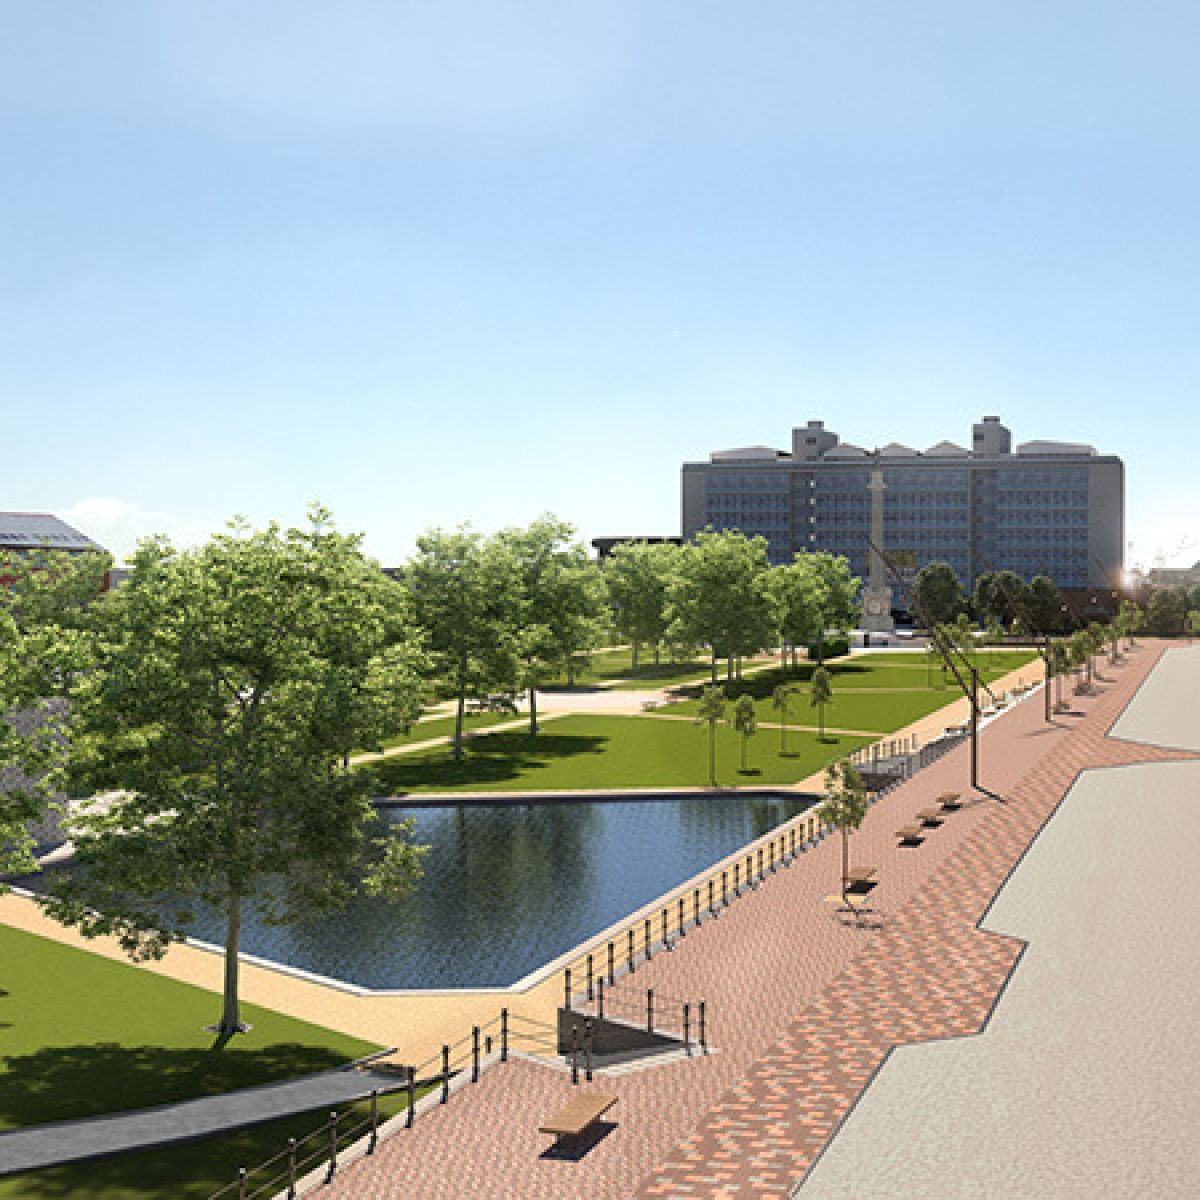 An artists' impression of a new-look Queens Gardens, providing a vital link between Hull Maritime Museum and North End Shipyard